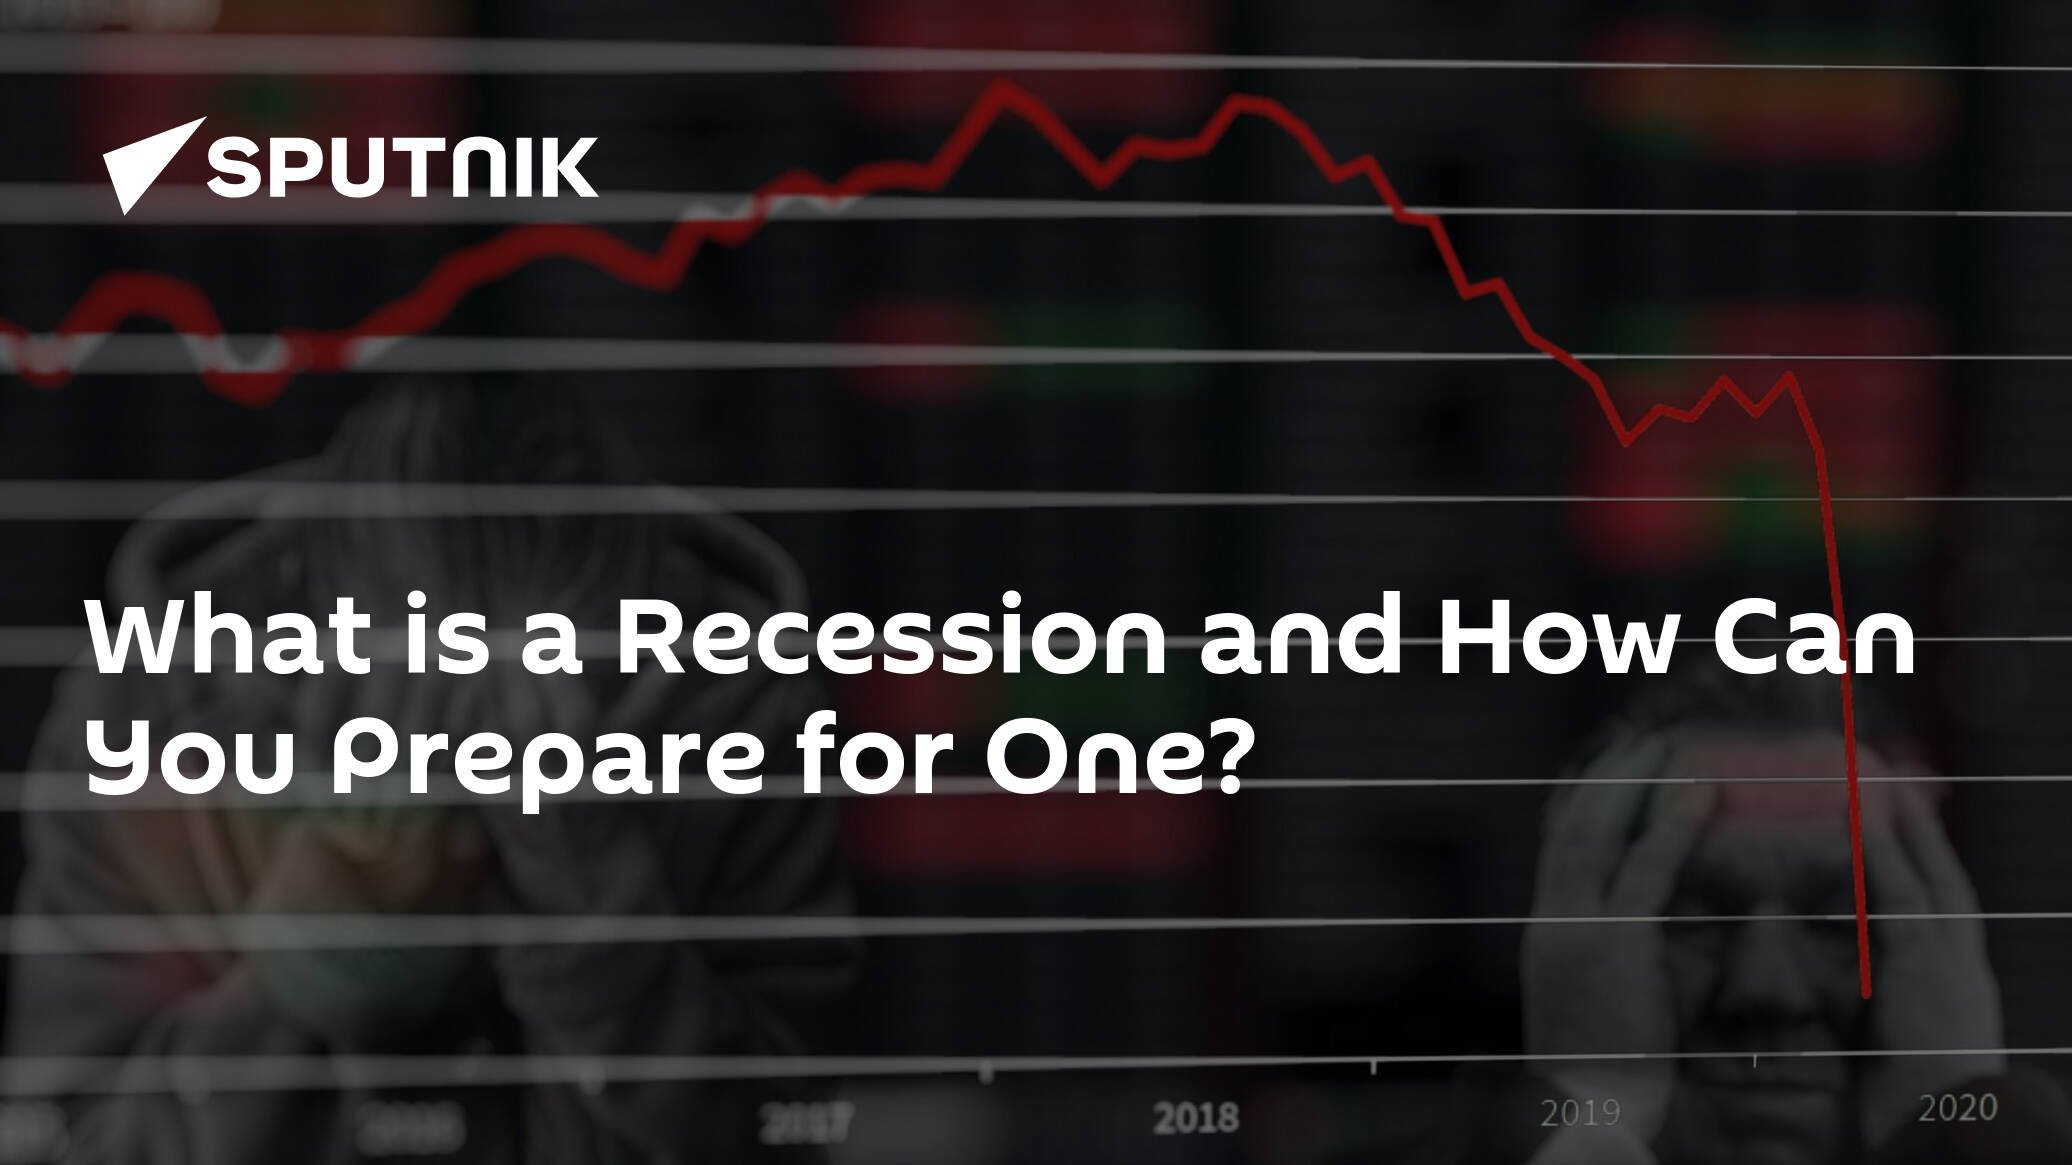 What is a Recession and How Can You Prepare for One?